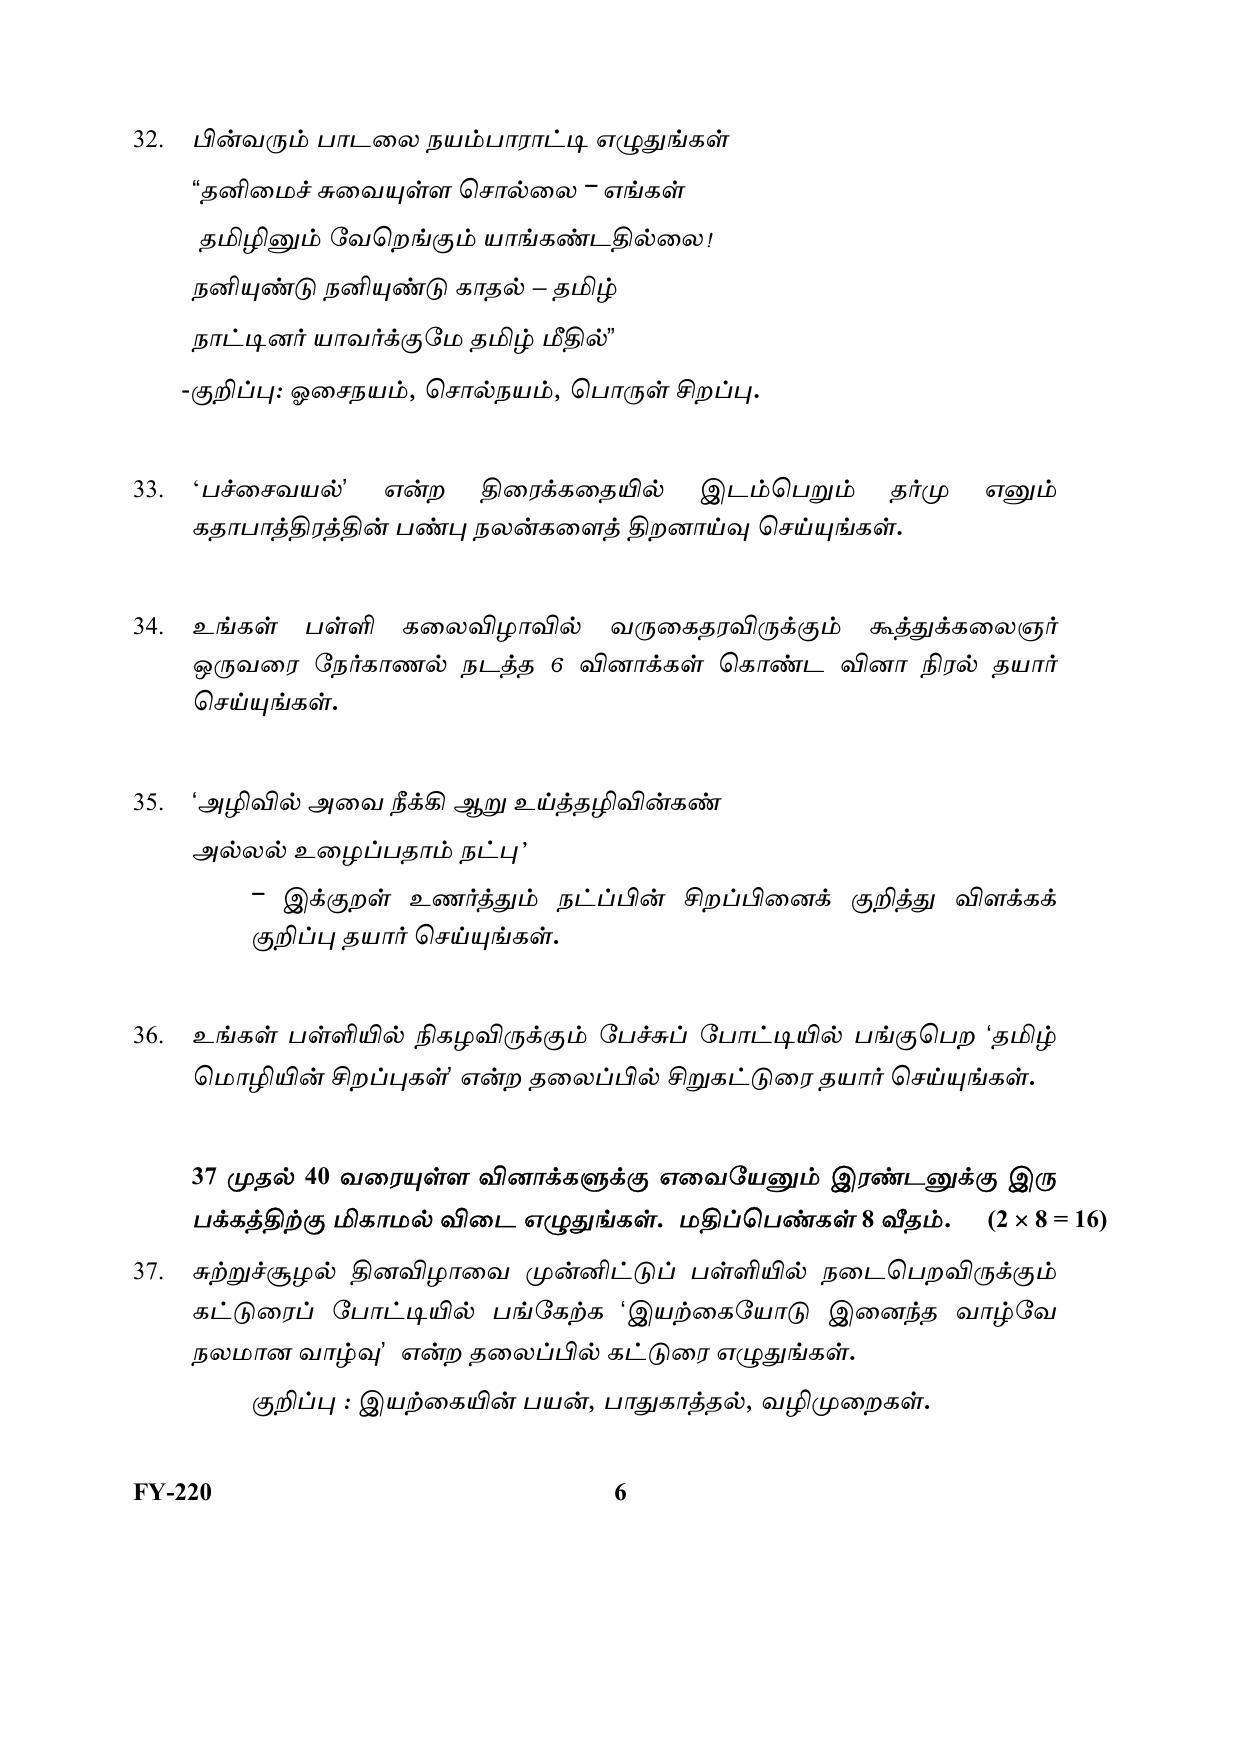 Kerala Plus One (Class 11th) Part-III Tamil-Optional Question Paper 2021 - Page 6